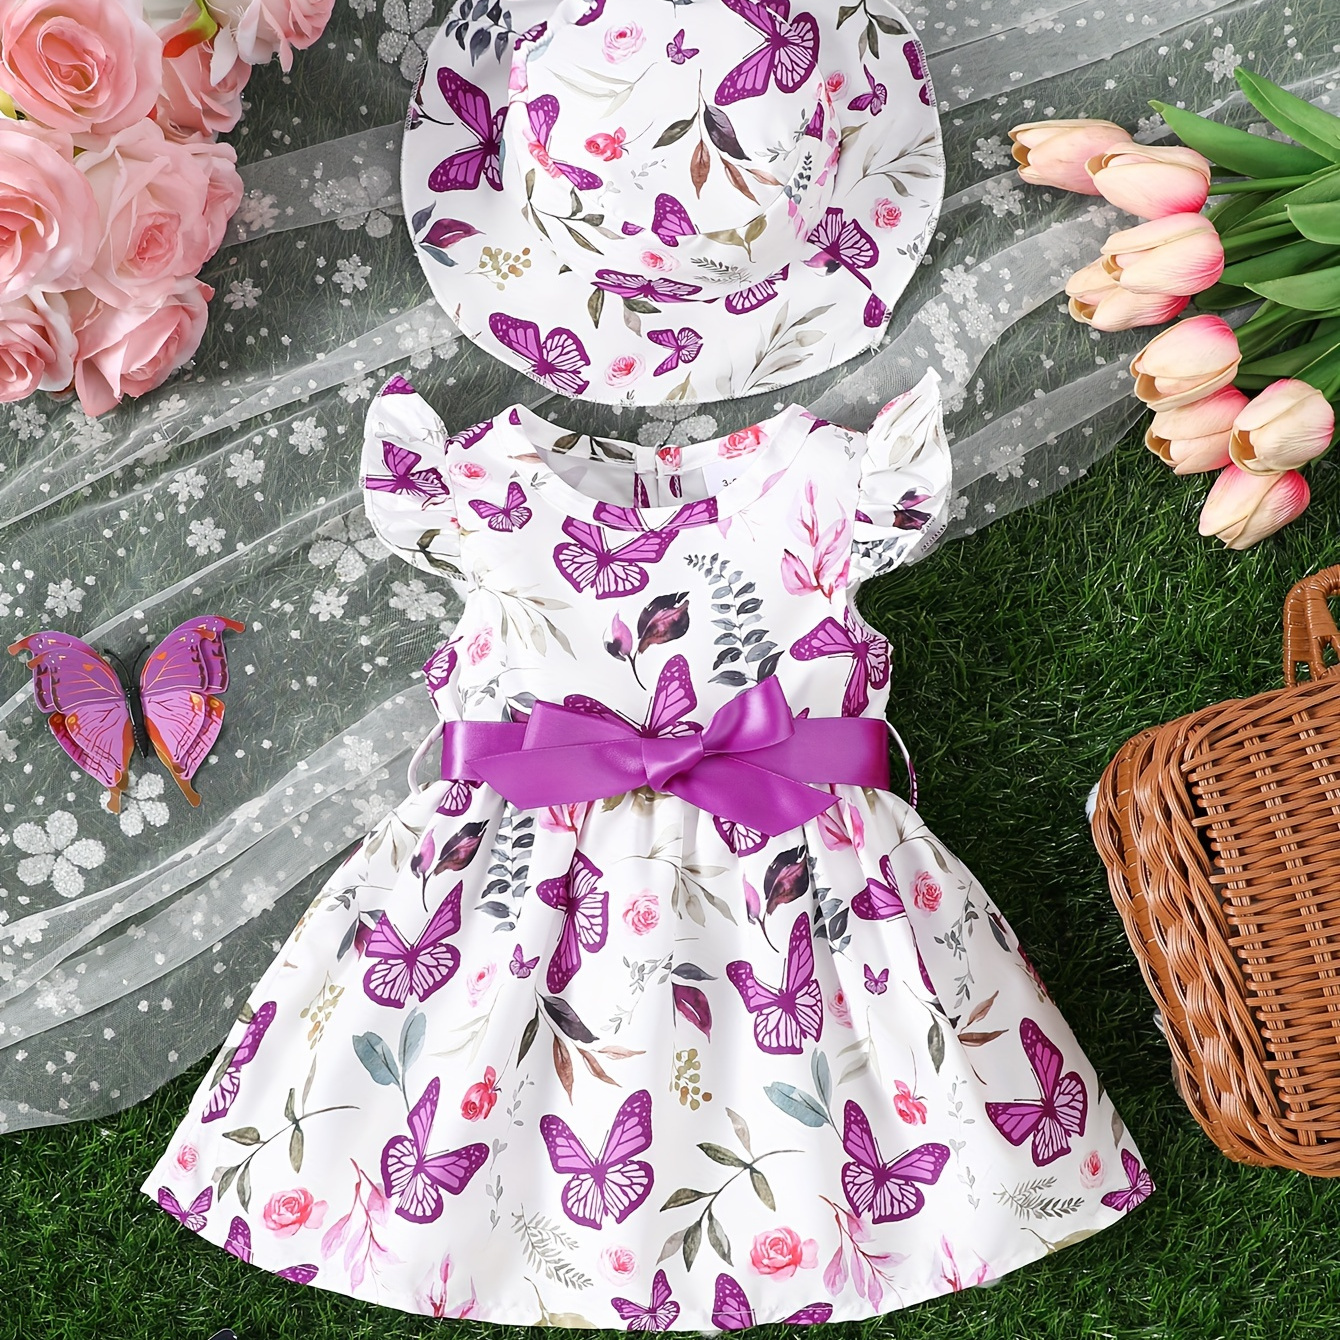 

Baby's Cartoon Butterfly All-over Print Belted Dress & Hat, Casual Cap Sleeve Dress, Infant & Toddler Girl's Clothing For Summer/spring